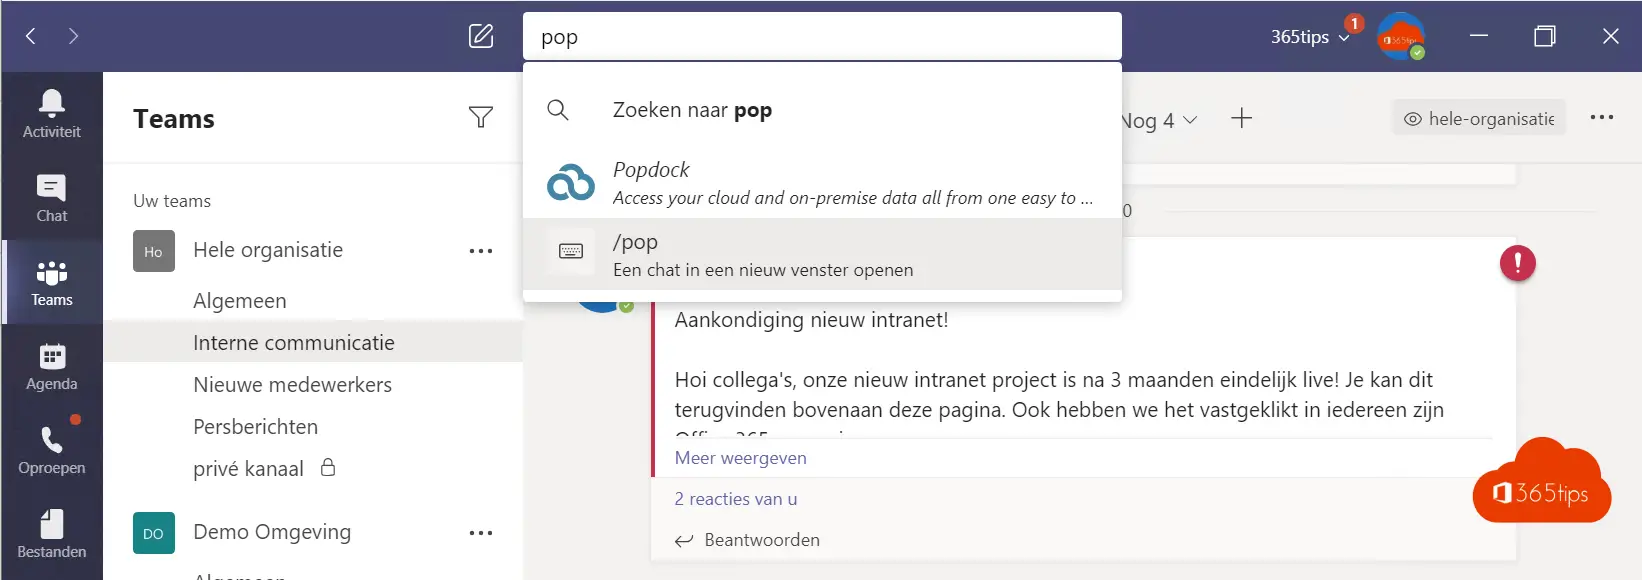 Microsoft Teams suggested answers and contextual search features